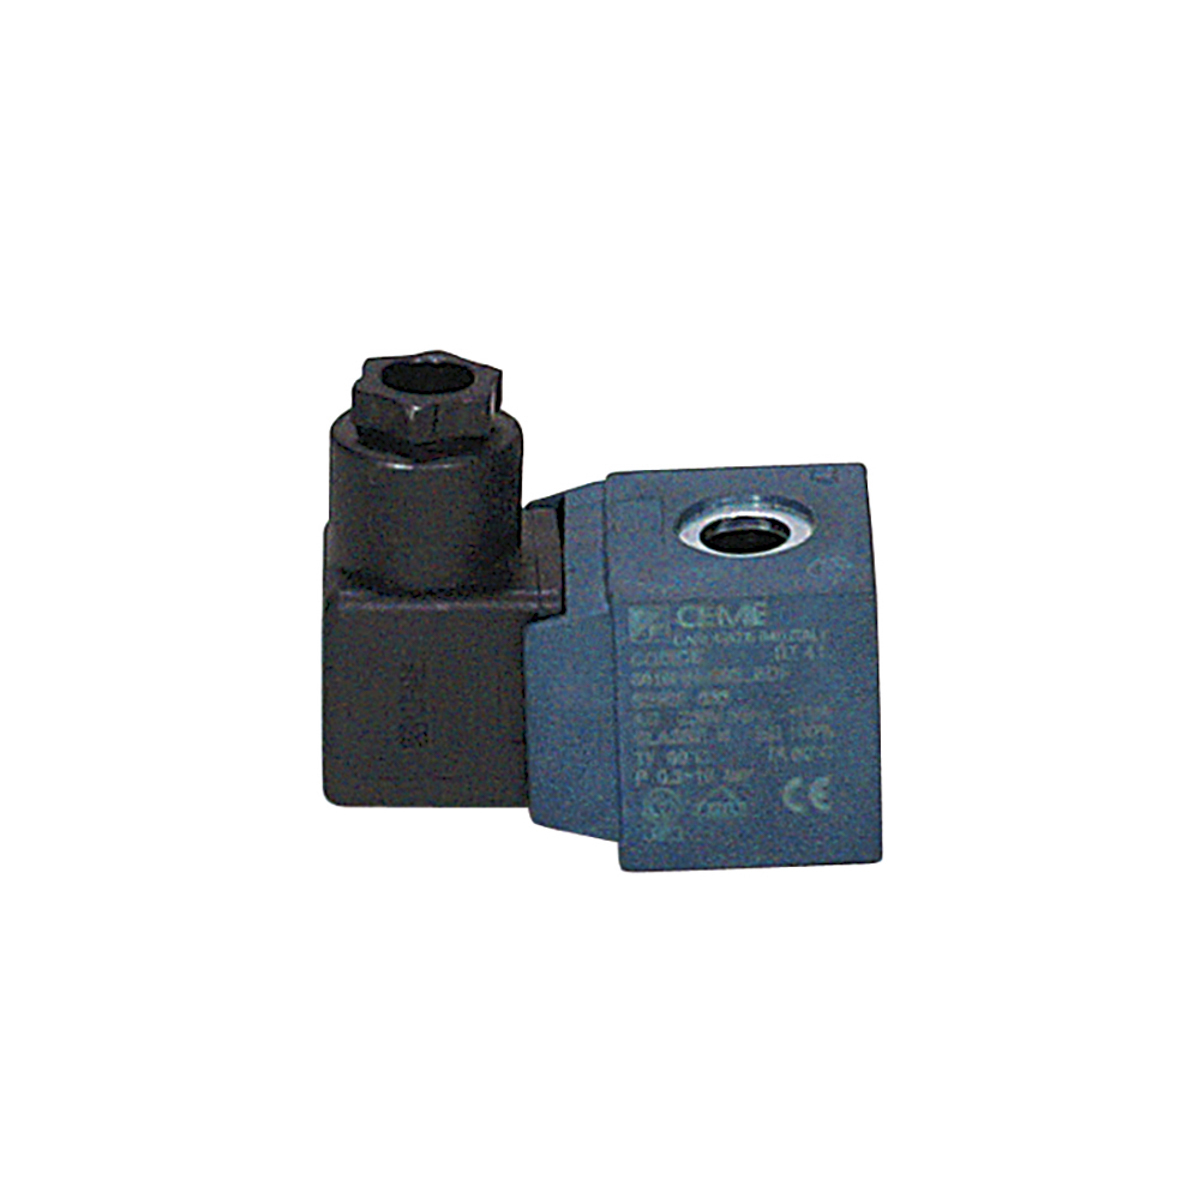 CEME Solenoids 400VAC for ESM 86/EBB with Connector